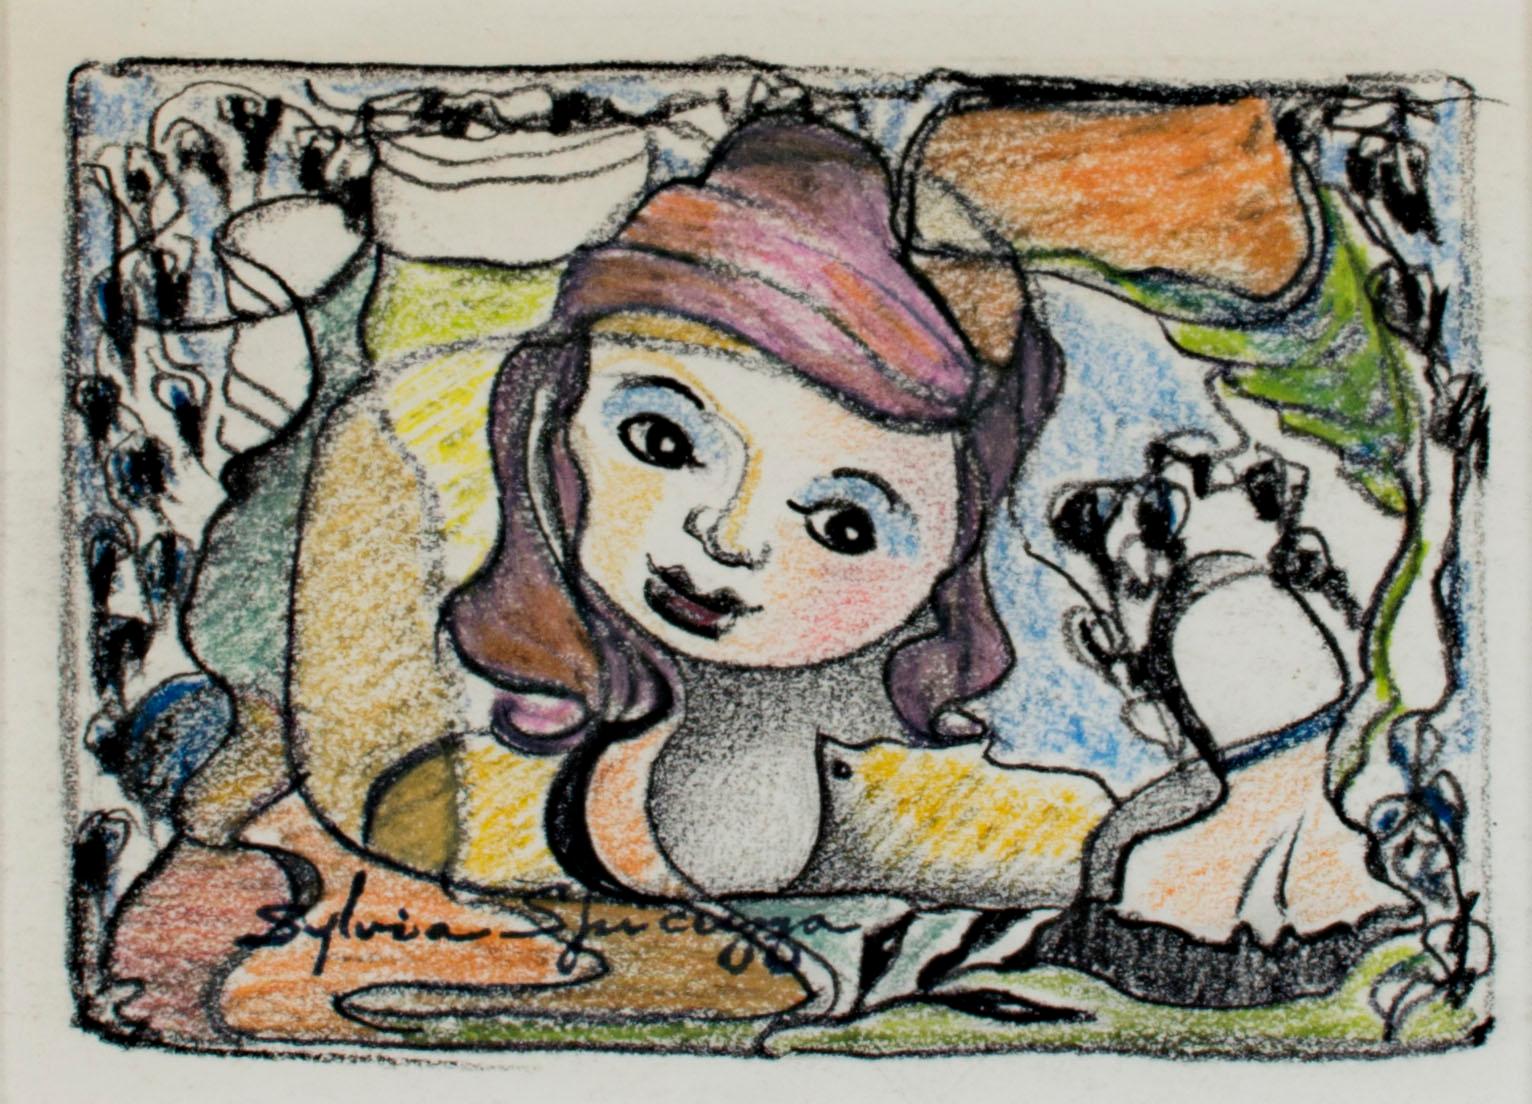 In this intimate drawing, Sylvia Spicuzza presents the viewer with a young woman crouched down in a garden. The image is framed by foliage and fields of color. 

3.75 x 5.25 inches, artwork
11.38 x 12.75 inches, frame
stamped with artist signature